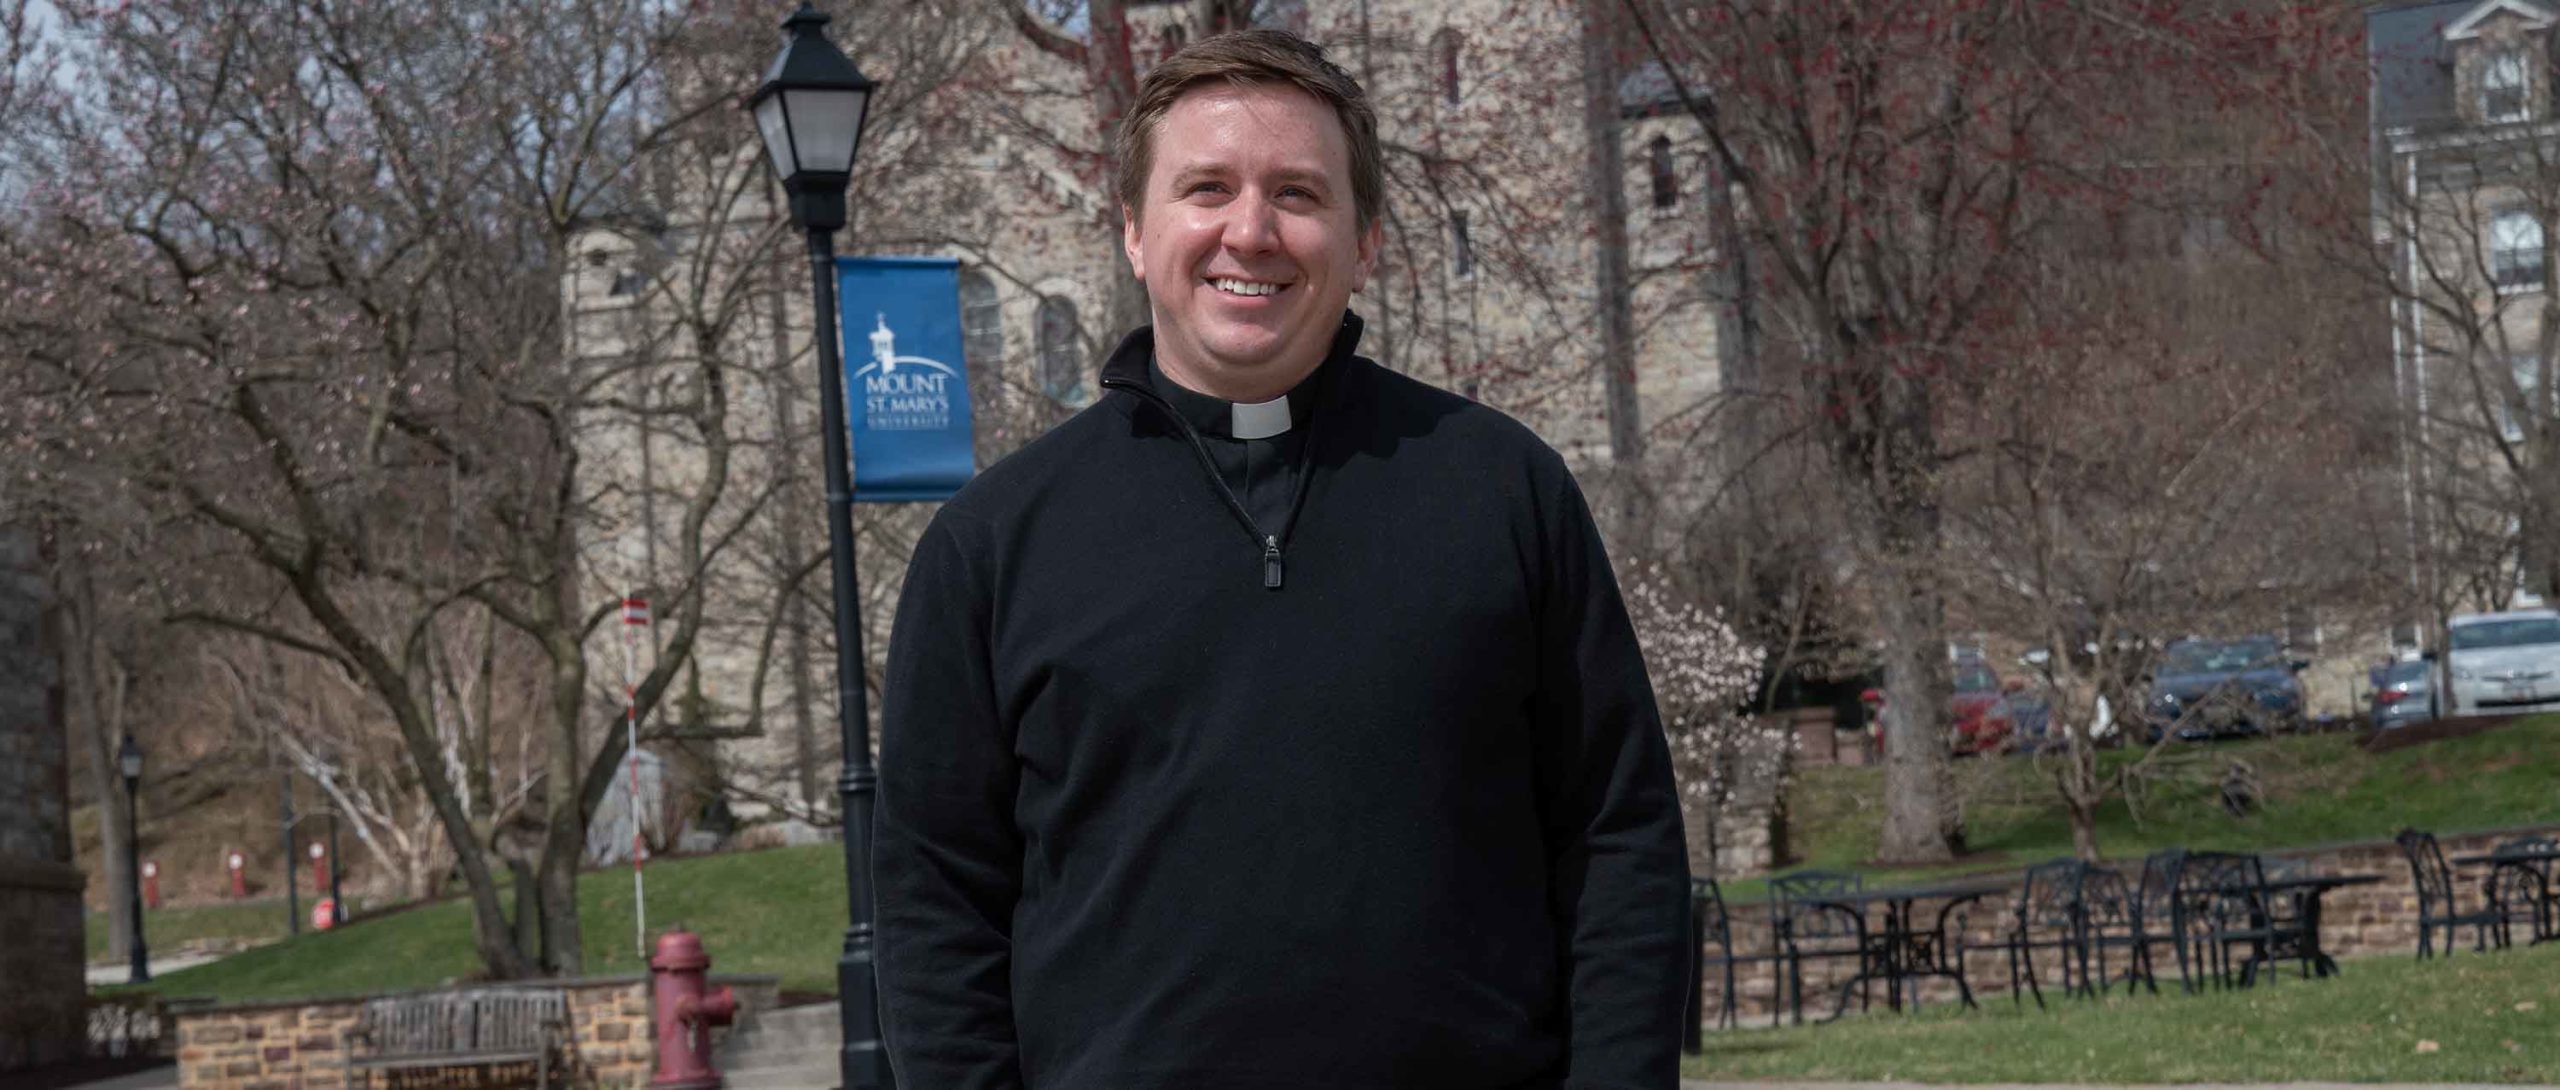 Nearing priestly ordination, Tyler Kline hopes to help people through God